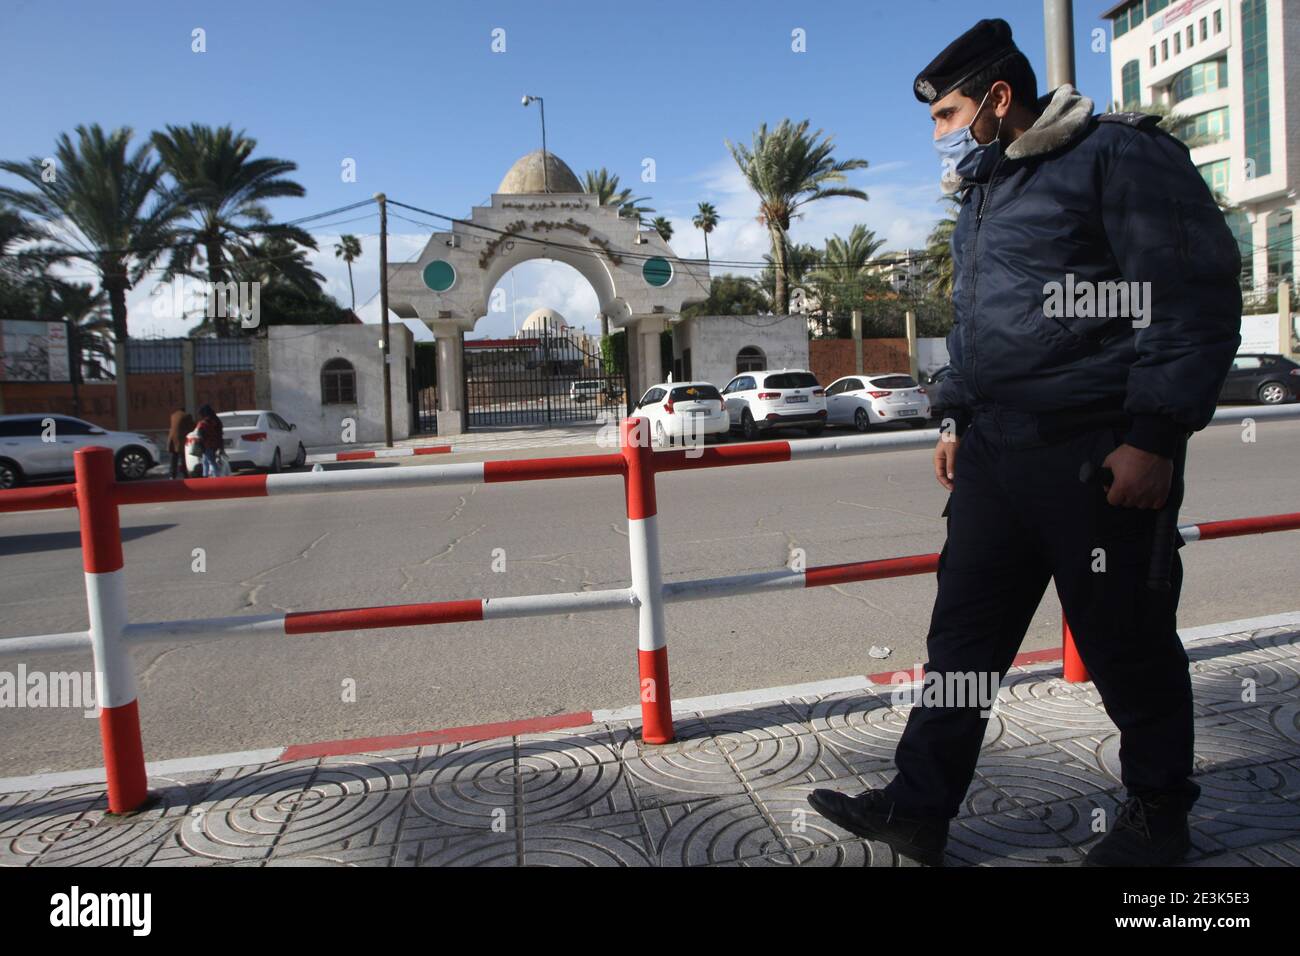 A Palestinian policeman walks past the entrance gate of the Legislative Council building in Gaza City on Tuesday on January 19, 2021. Palestinian president Mahmud Abbas on January 15, announced dates for the first elections in more than 15 years, setting legislative polls for May 22 and a July 31 presidential vote. Abbas's Fatah party, which controls the Palestinian Authority based in the occupied West Bank, and the Hamas Islamists, who hold power in Gaza, have for years expressed interest in taking Palestinians back to the polls. Photo by Ismael Mohamad/UPI Stock Photo